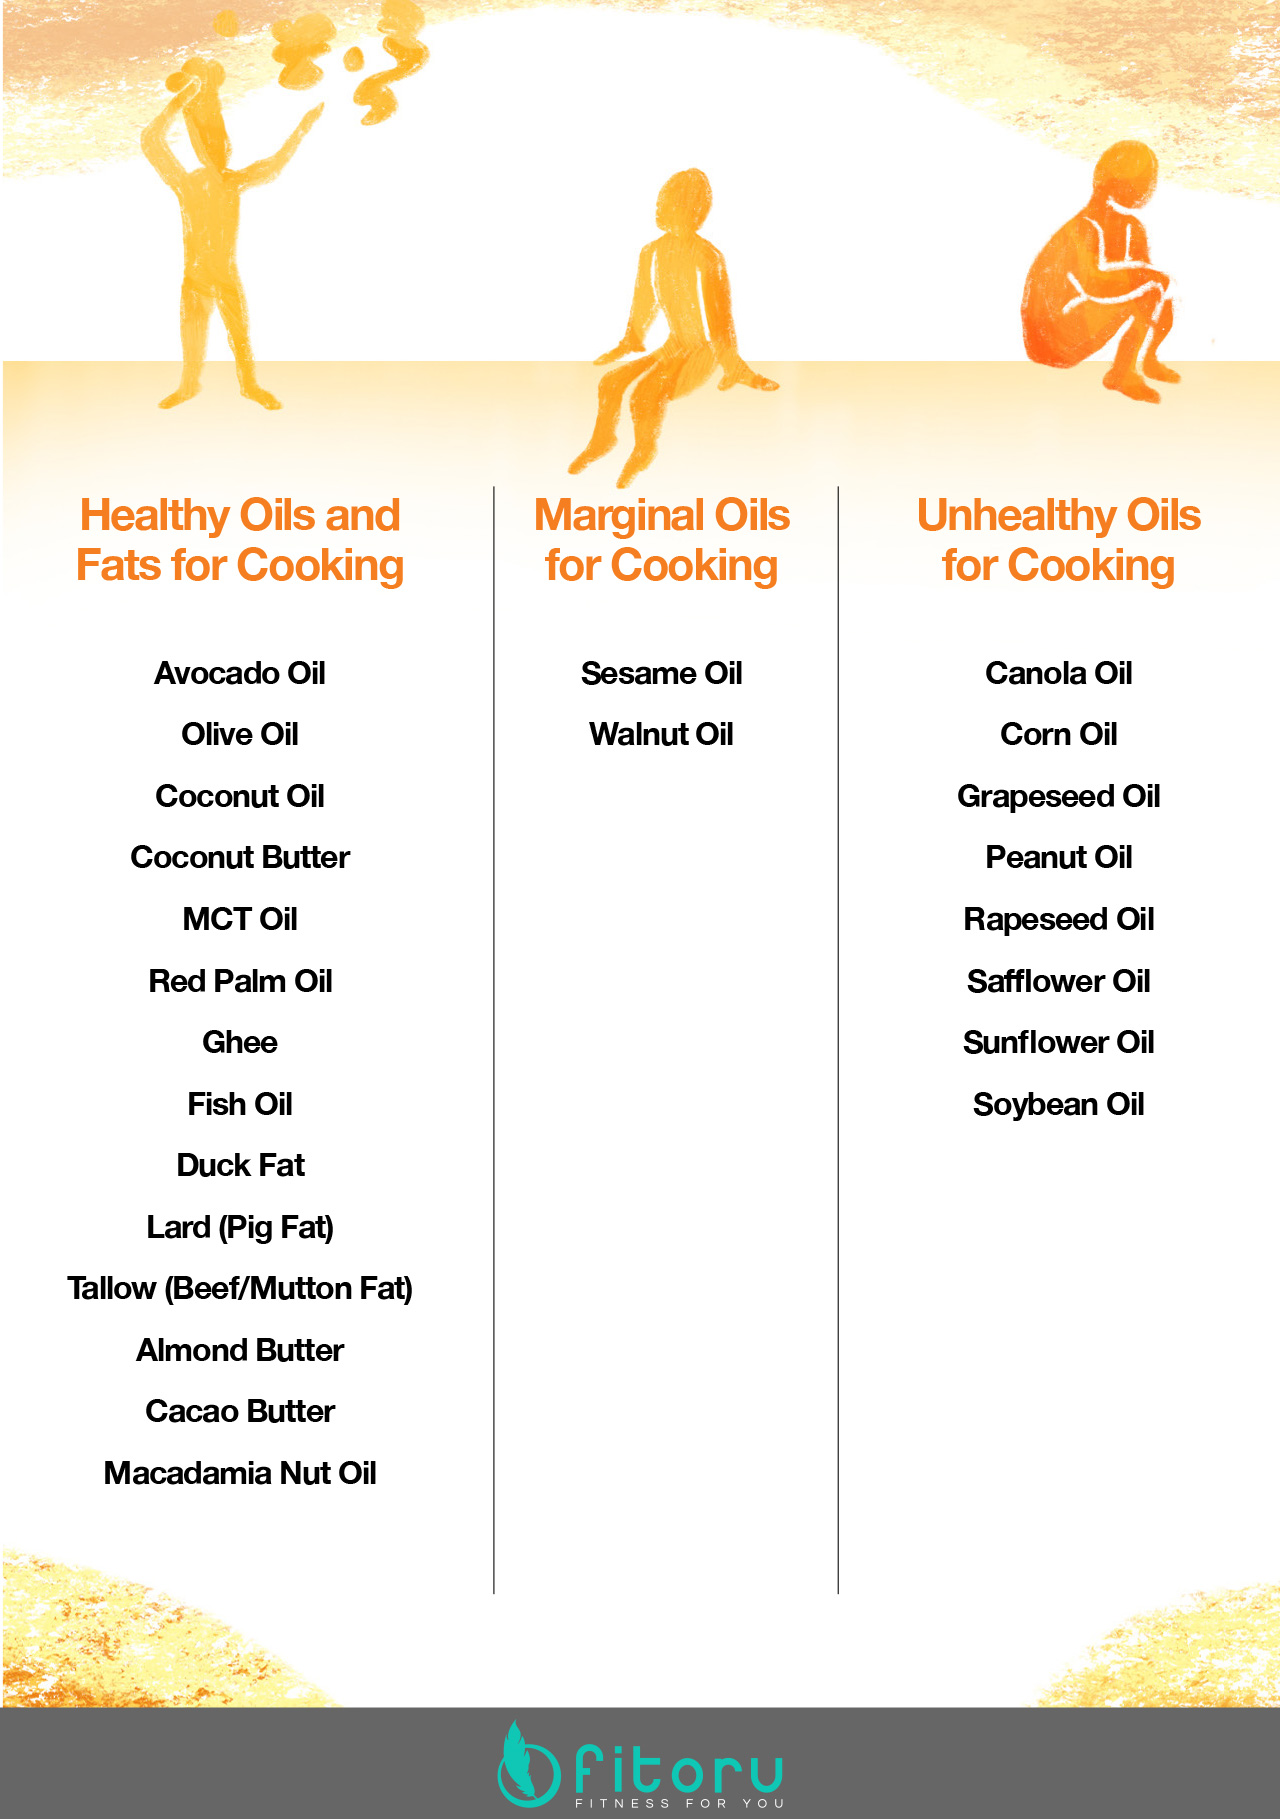 The healthiest oils and fats for cooking.